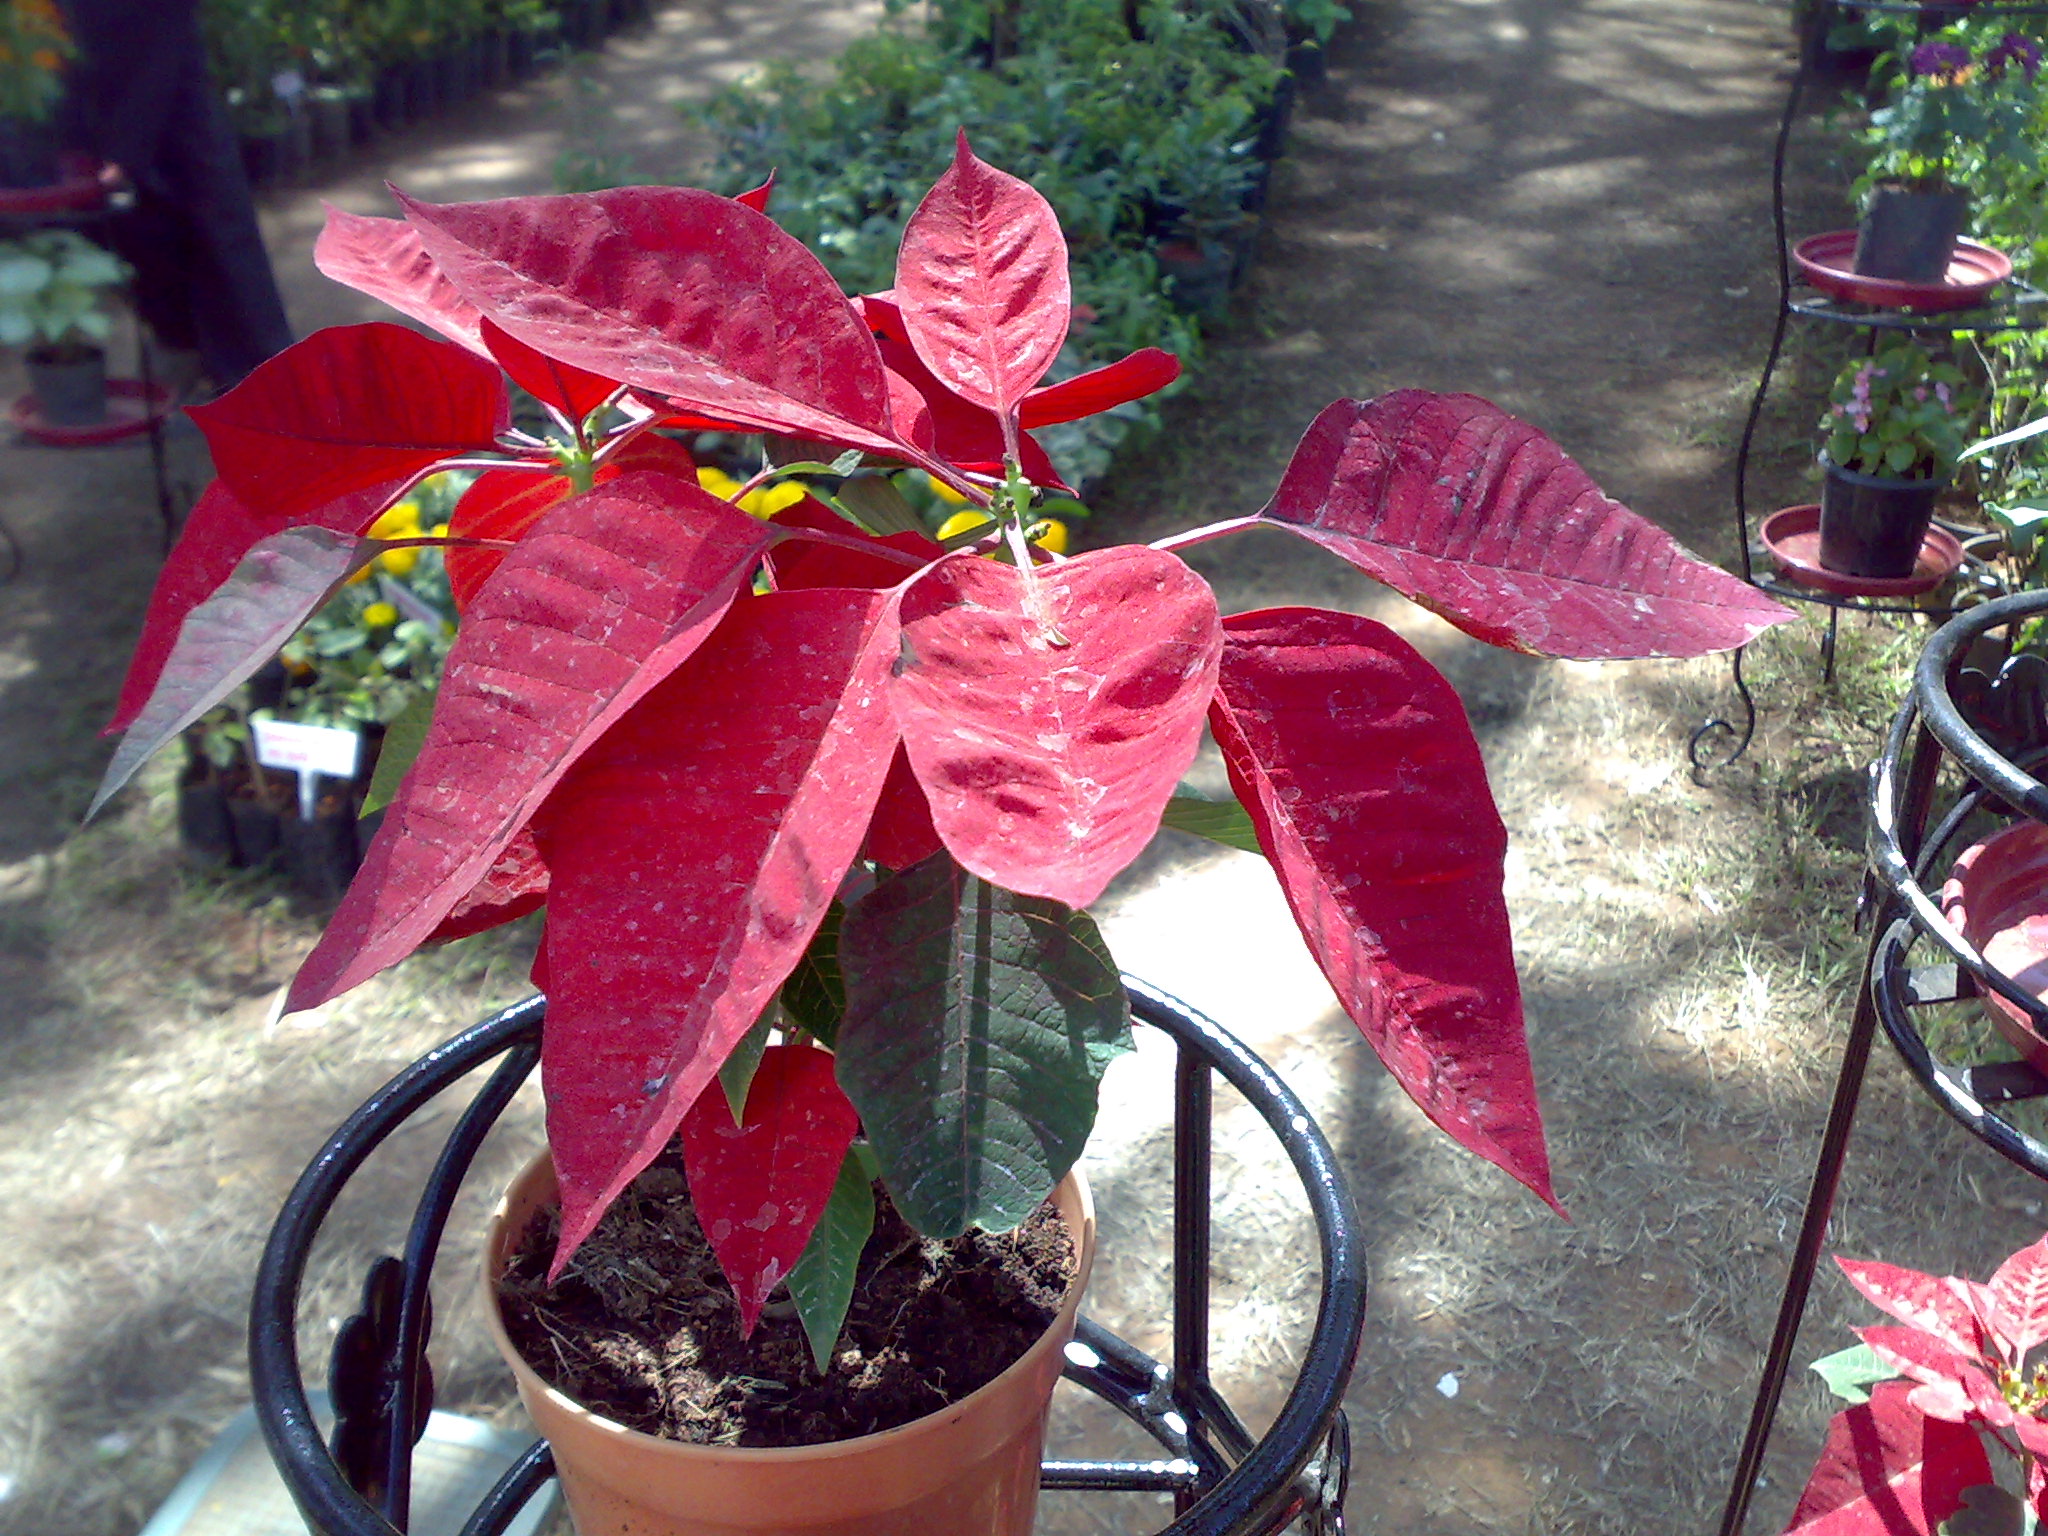 File:Plant with red leaf.jpg - Wikimedia Commons